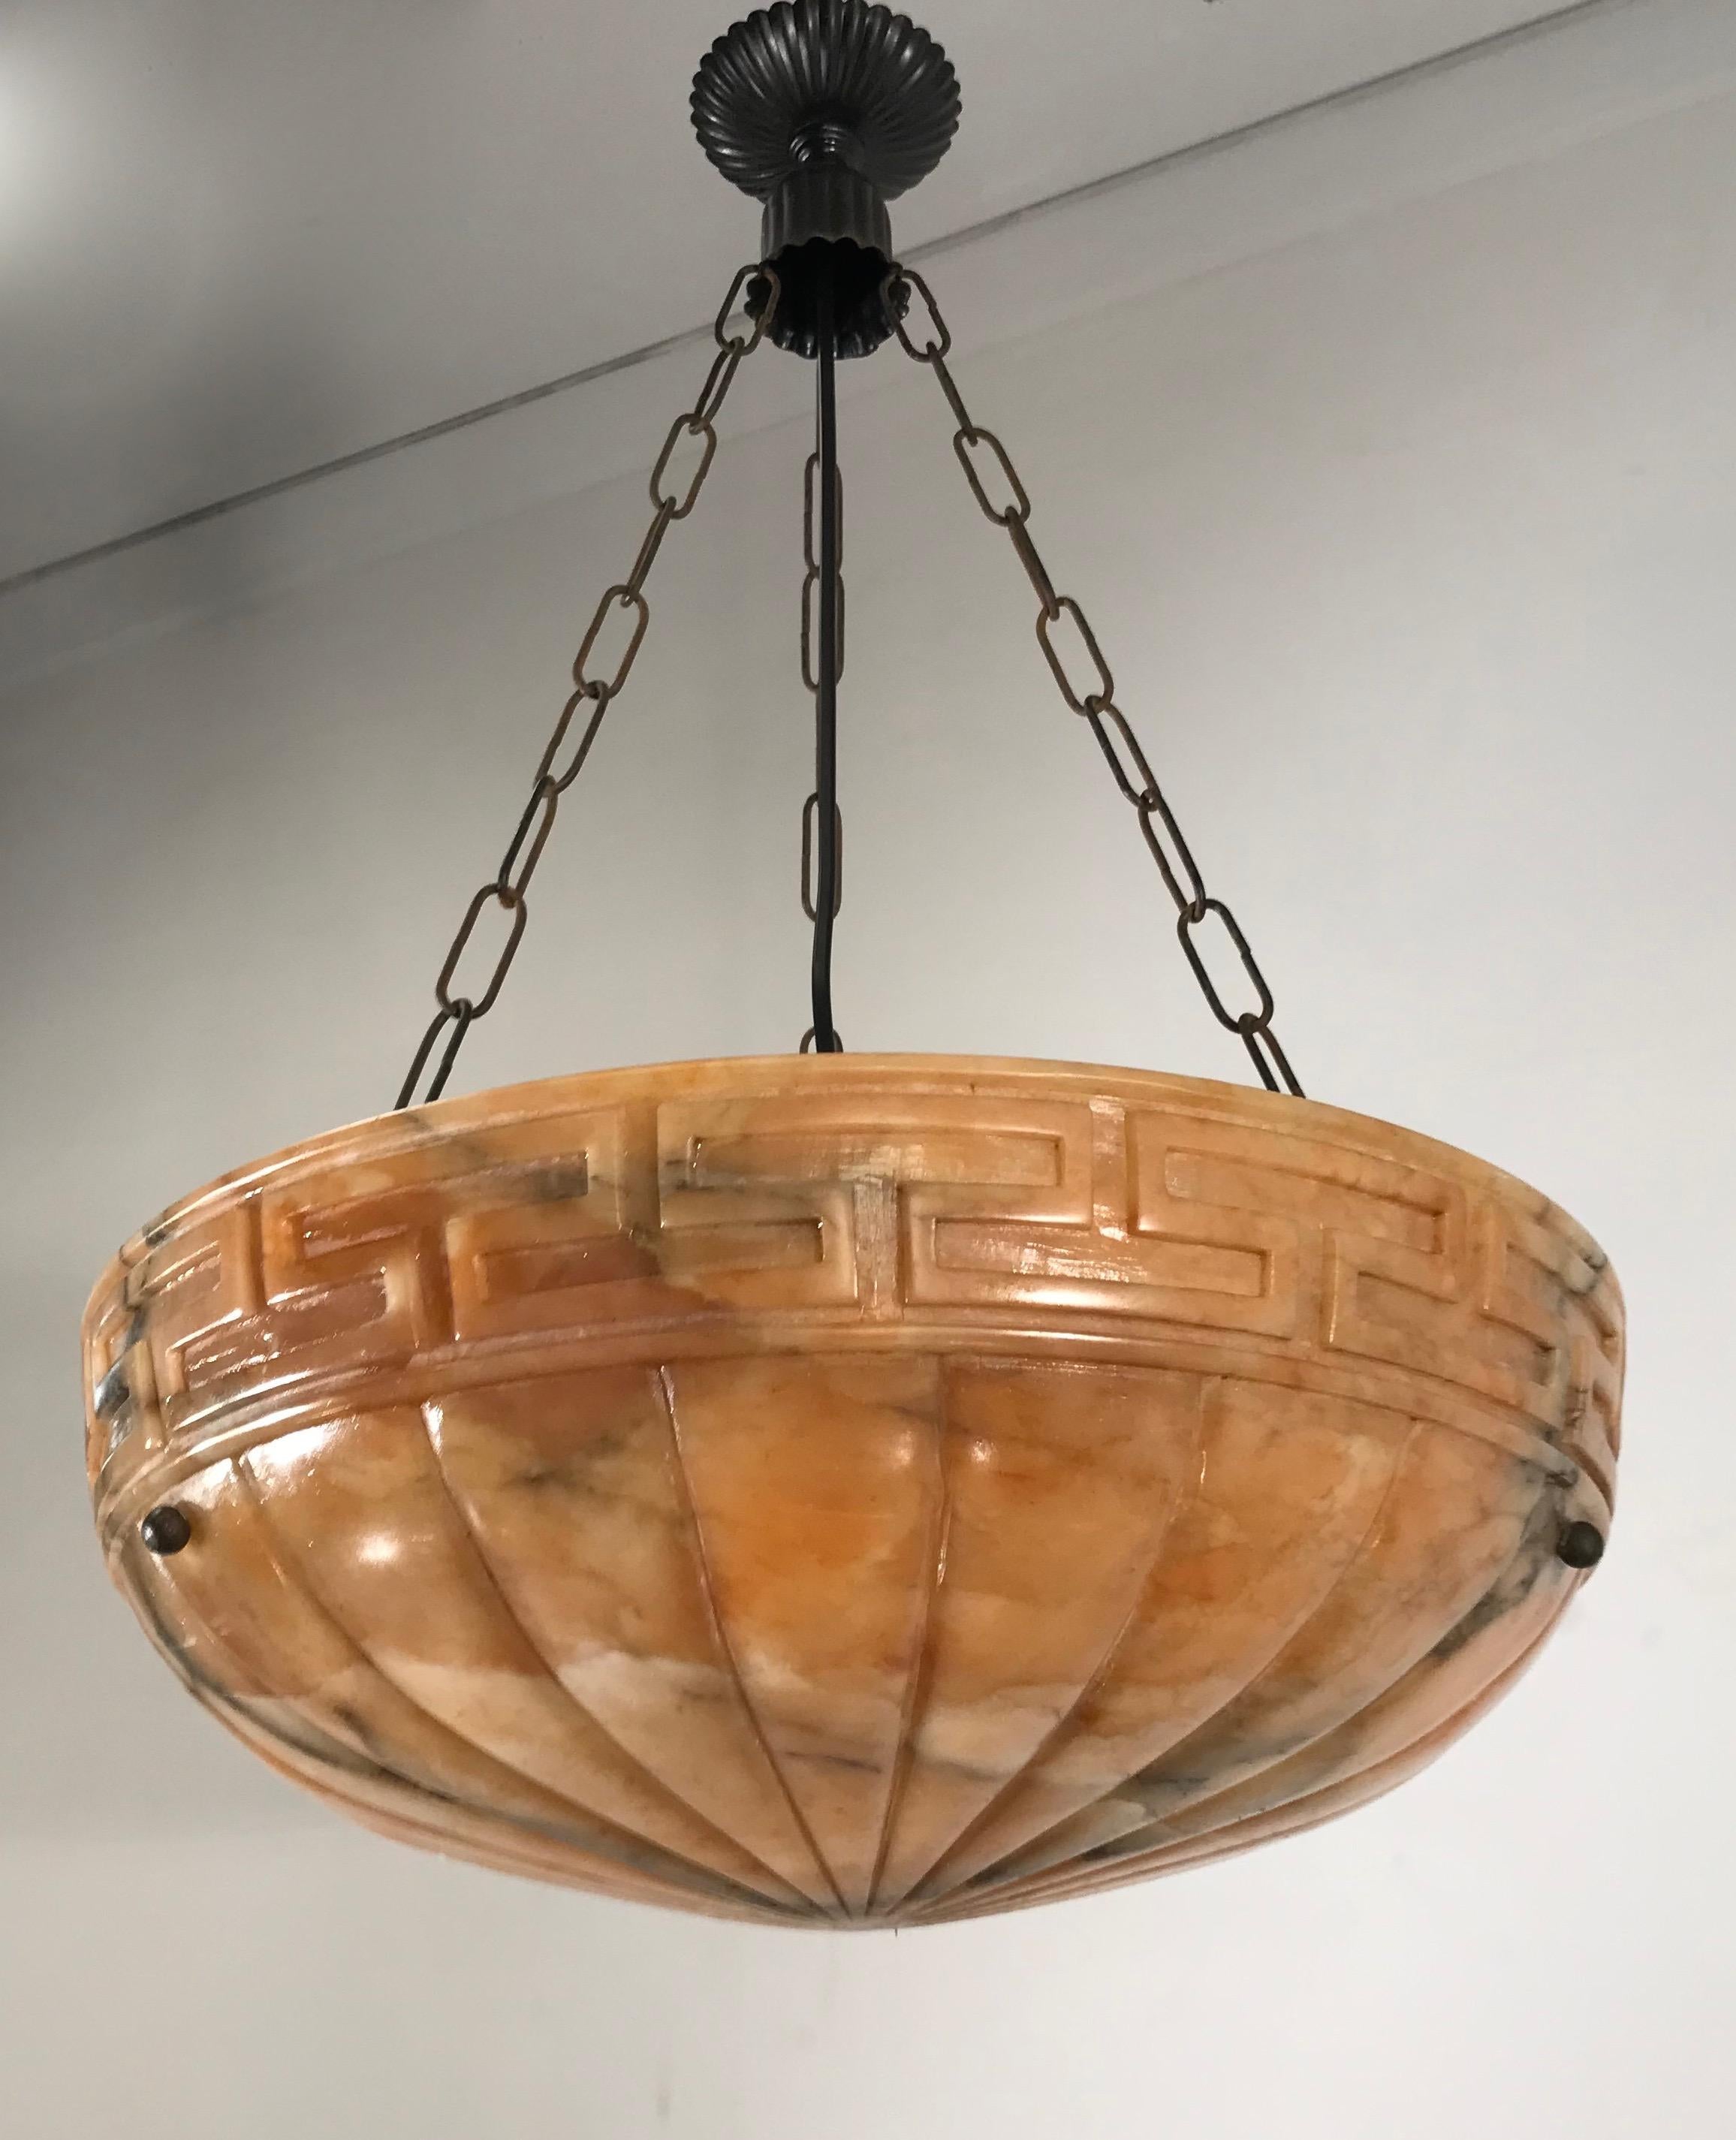 Hand-Crafted Good Size Neoclassical Early 1900s Alabaster Pendant Light Fixture / Chandelier